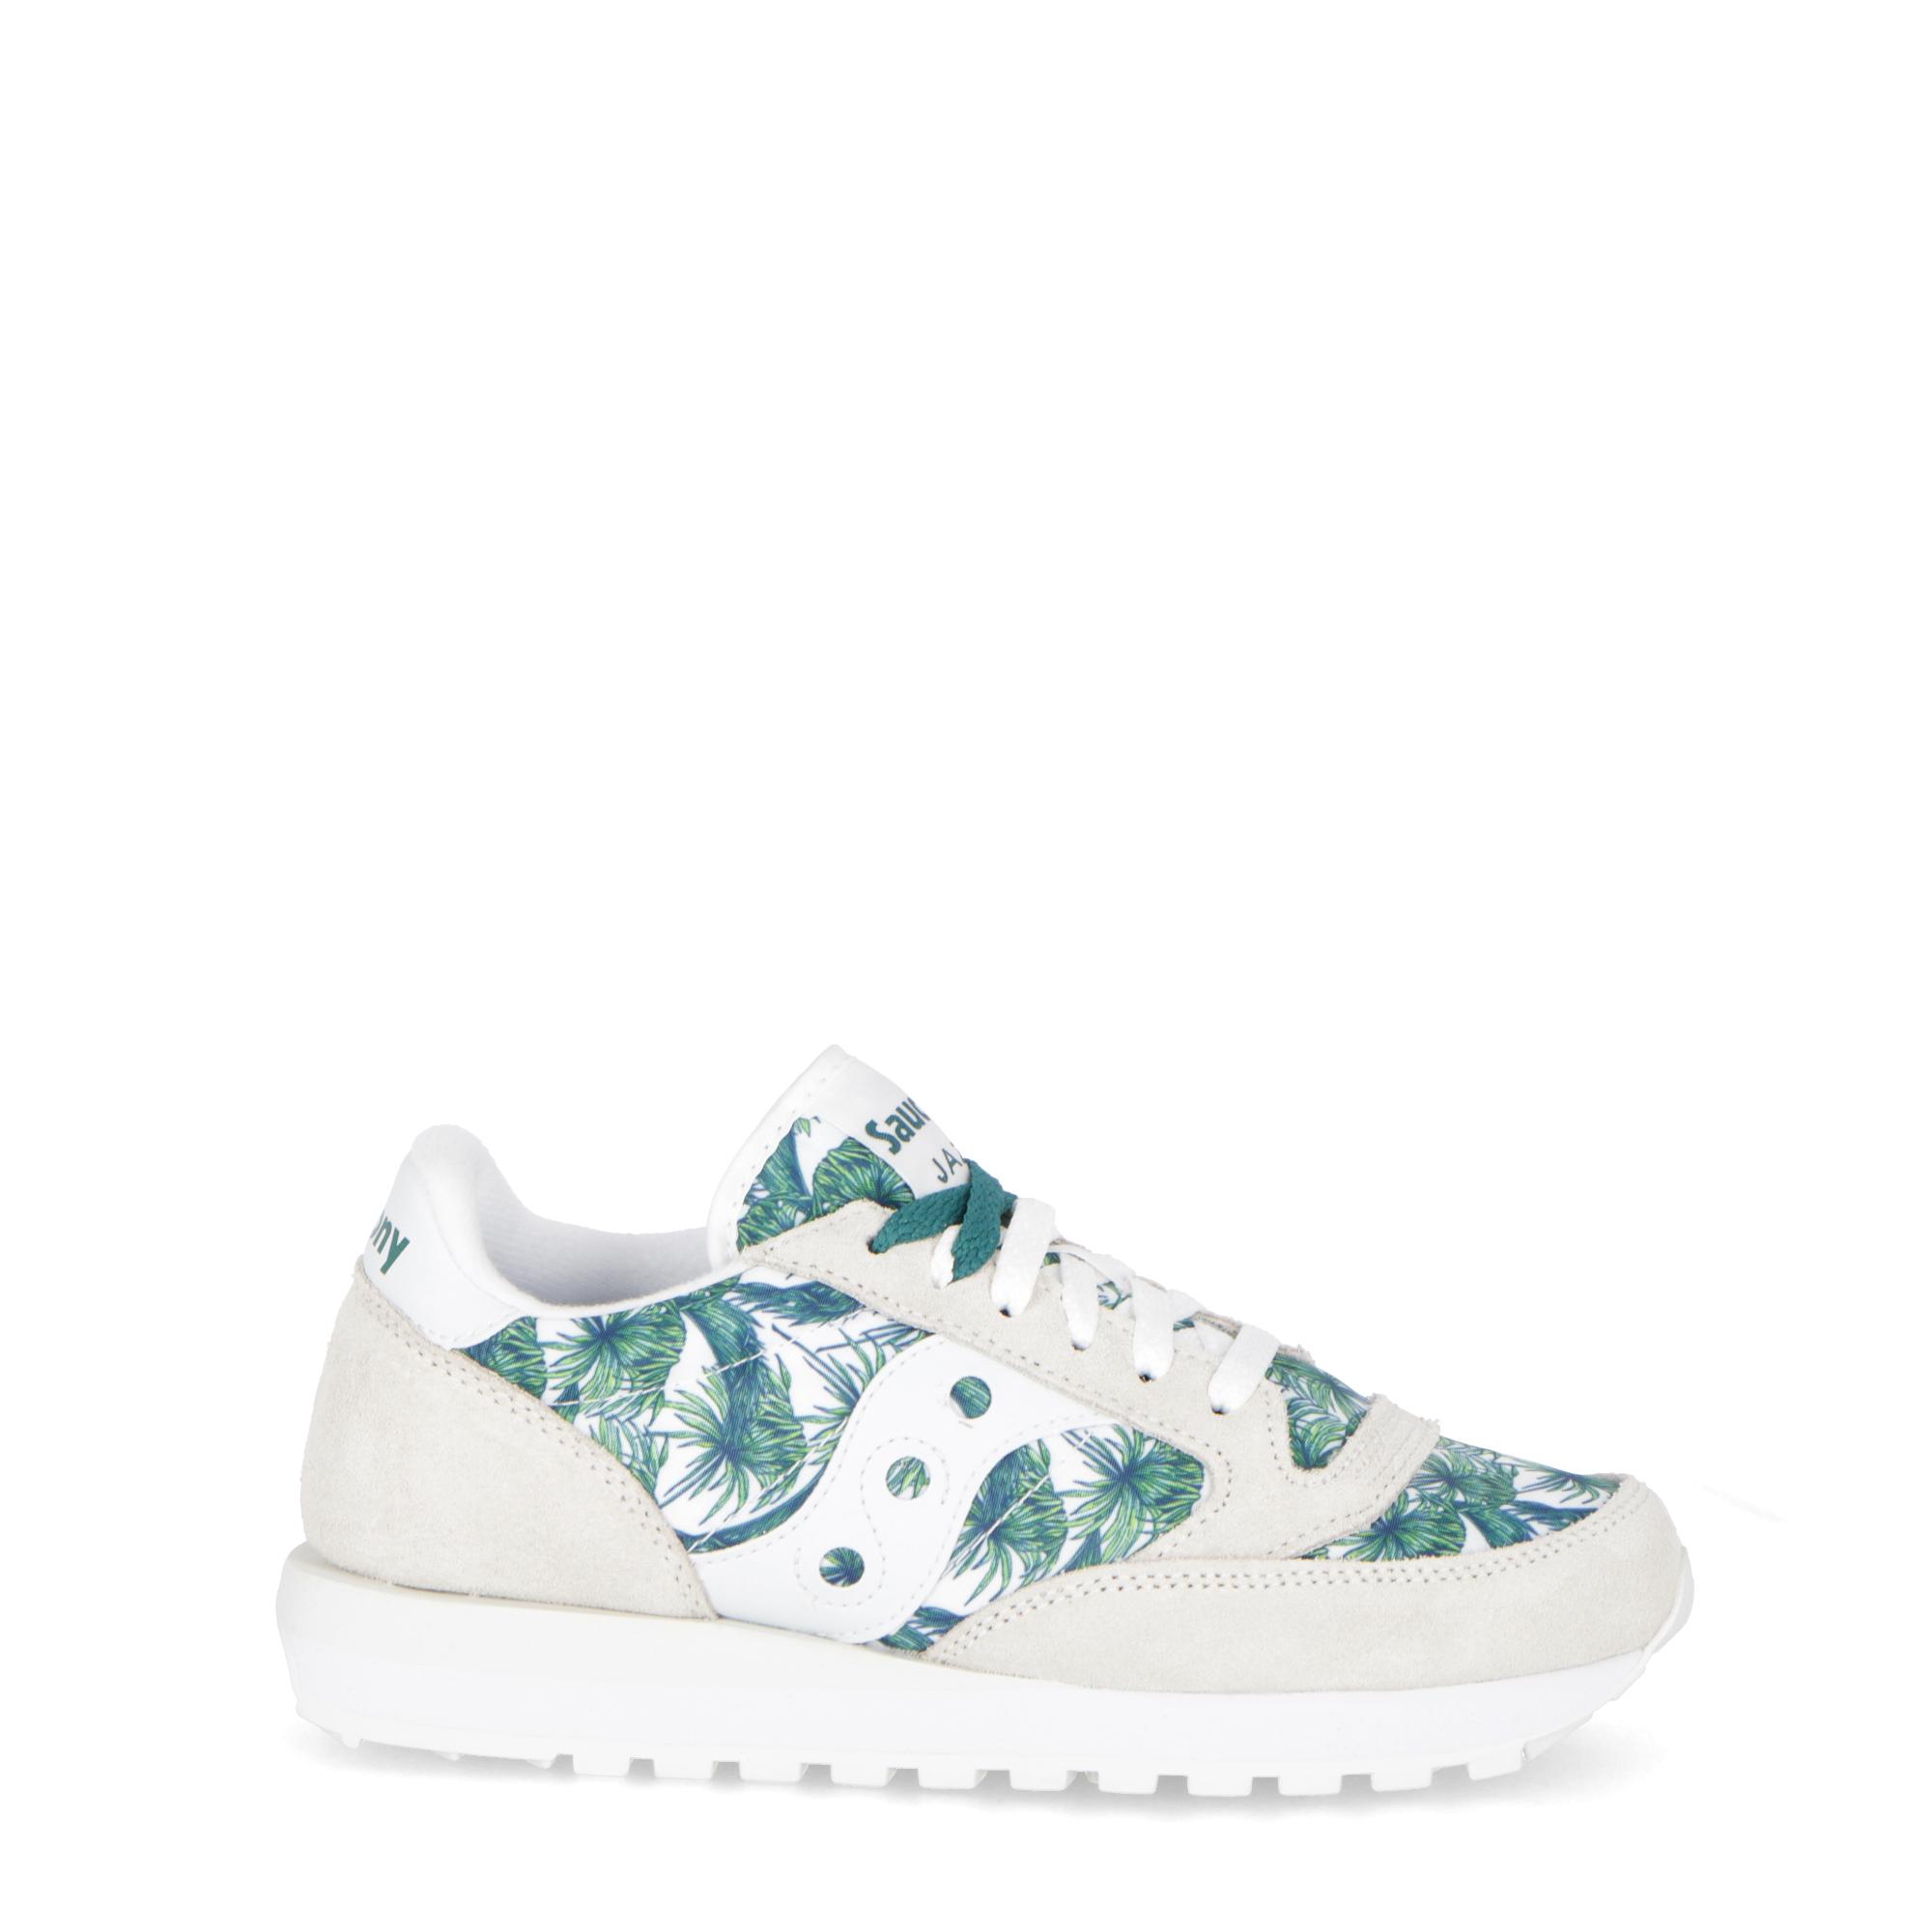 saucony jazz o floral limited edition